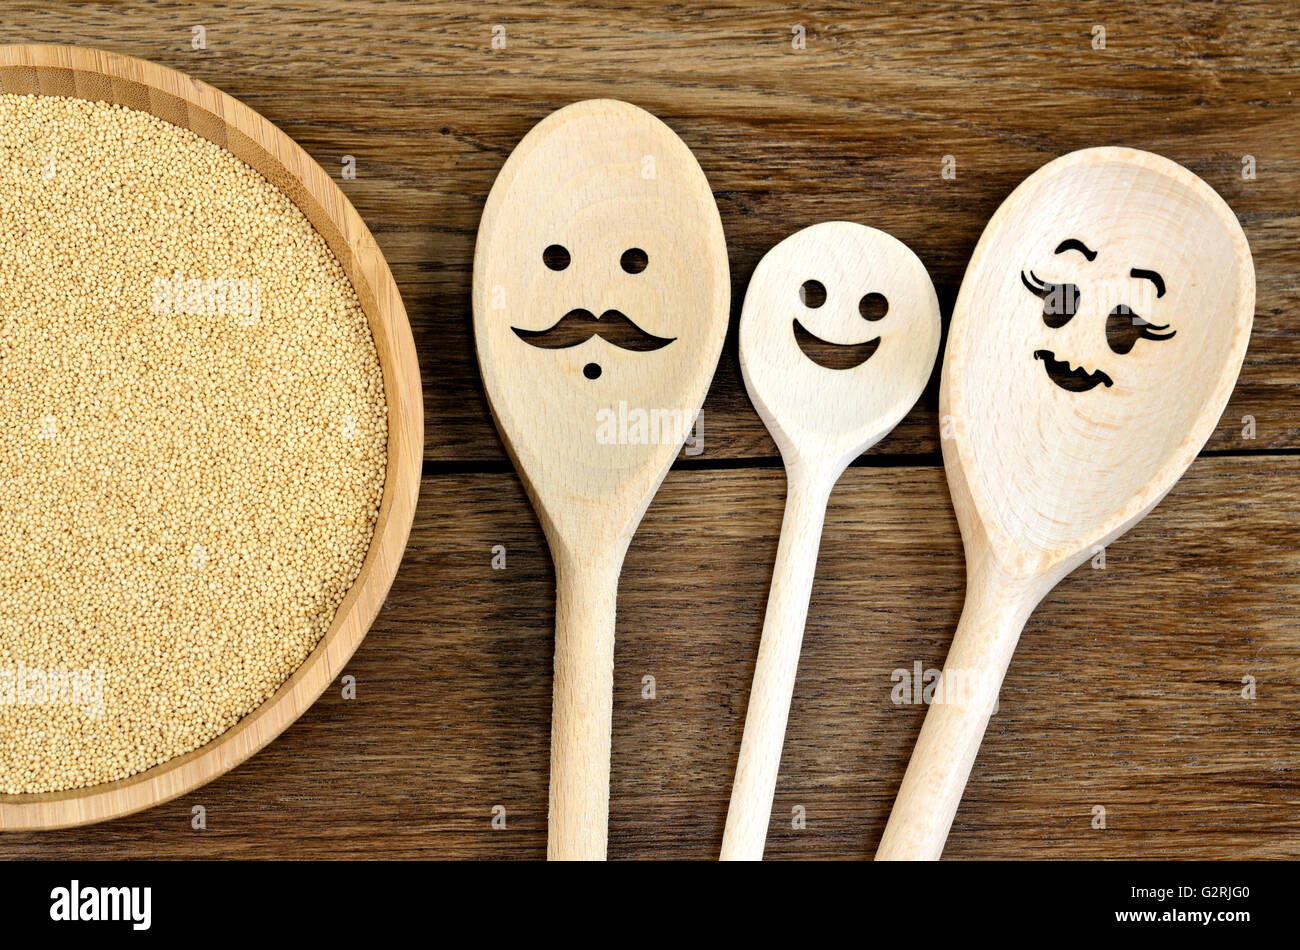 Family wooden spoon with amaranth seeds in a bamboo bowl on wooden table Stock Photo